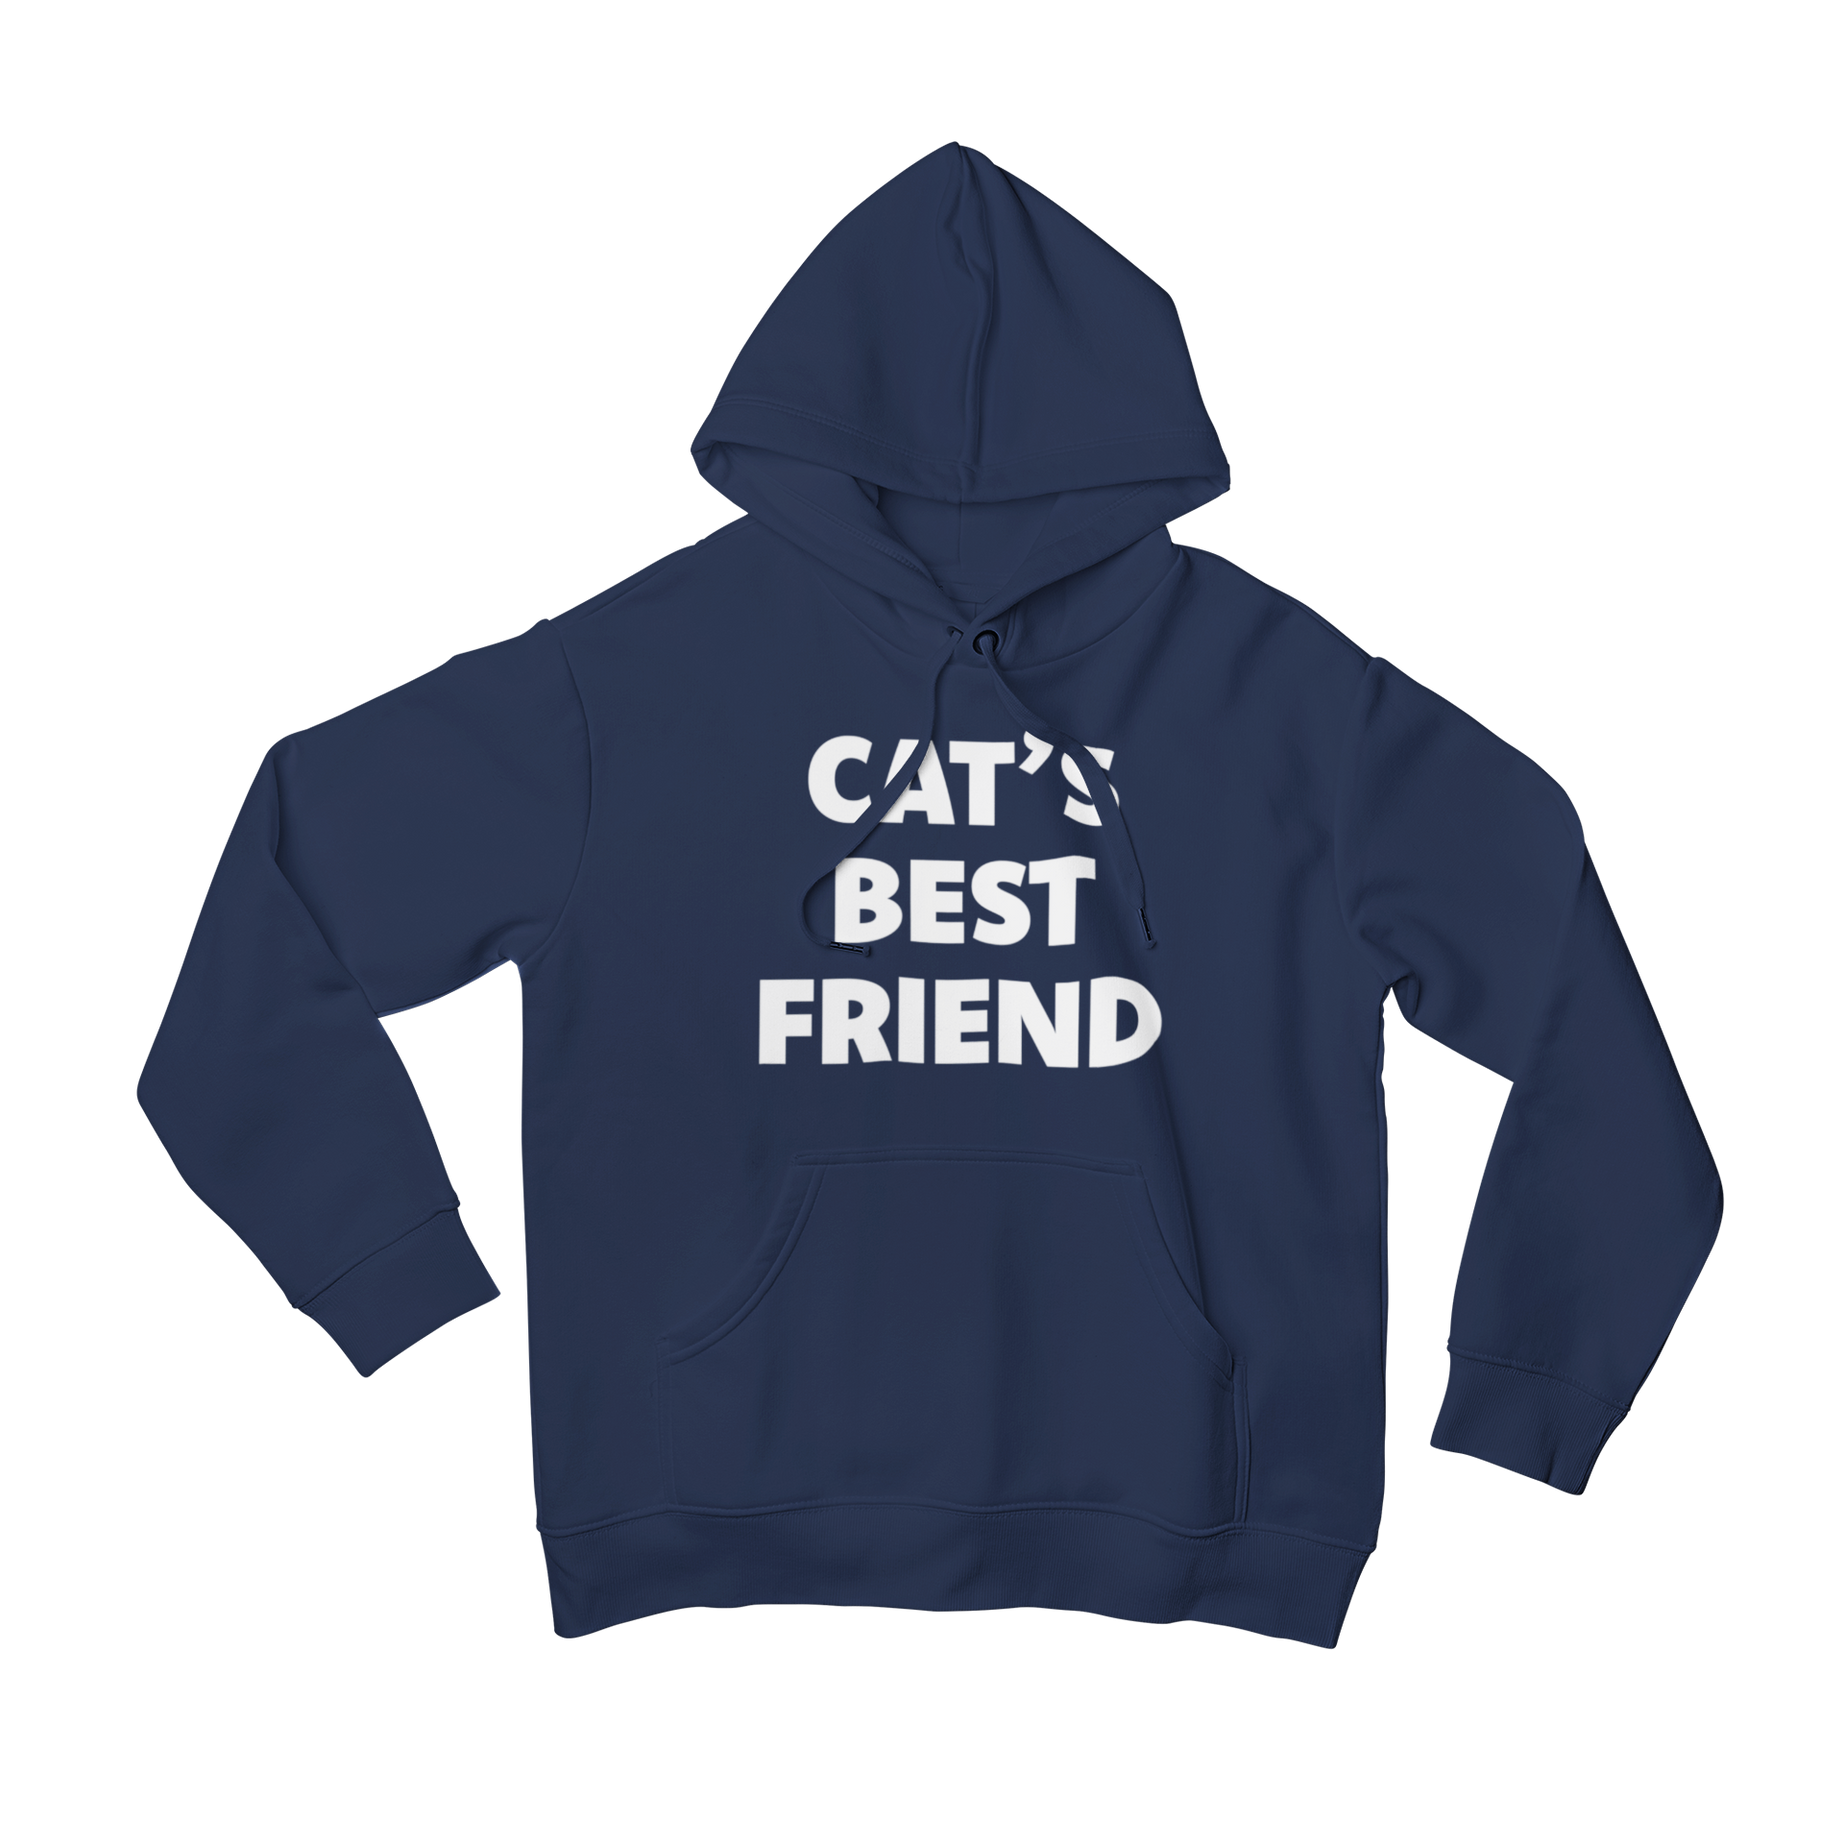 Make a statement with our Cat's Best Friend Front Print Hoodie. Featuring a playful slogan and a cute cat graphic, this hoodie is perfect for cat lovers who want to show off their feline friendship. Stay cozy and stylish with this quirky and fun addition to your wardrobe.